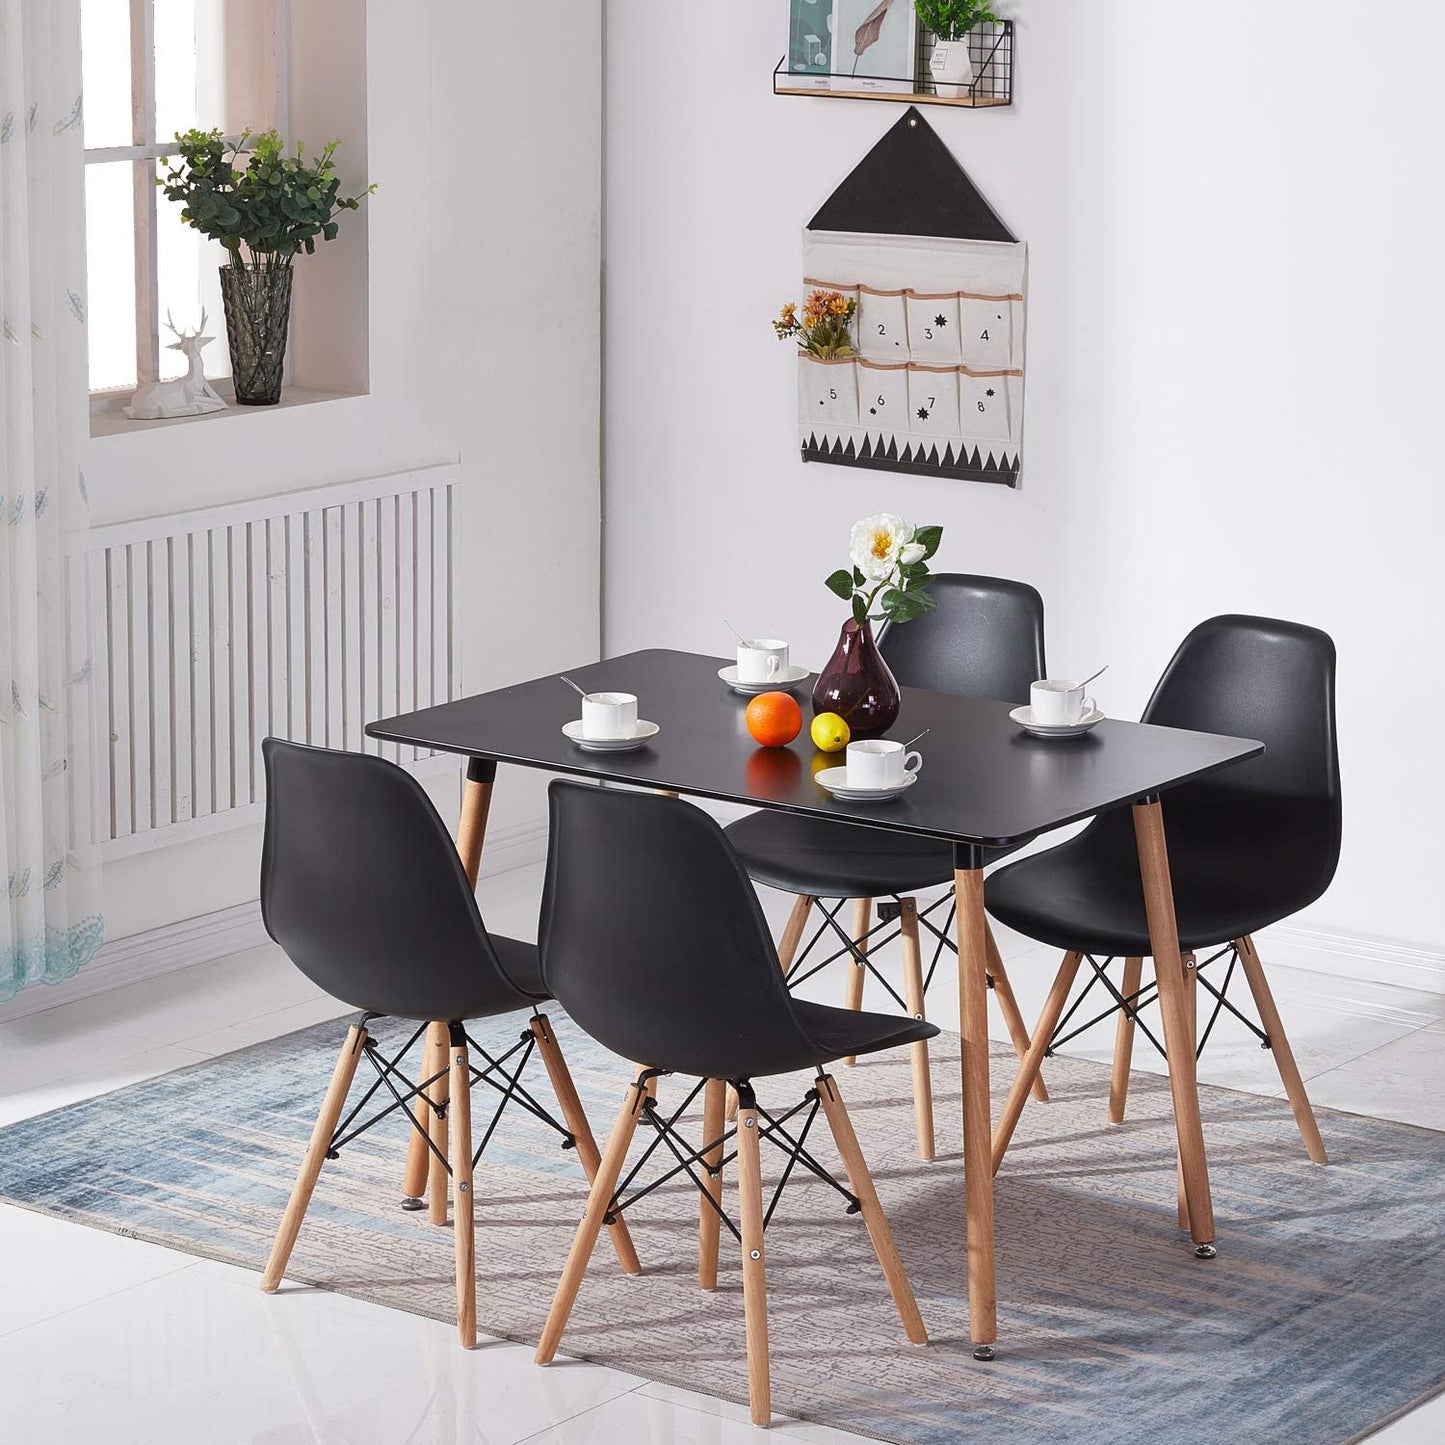 SAGE Rectangular MDF dining tables with beech legs 110 * 70 * 74 cm - Black/White